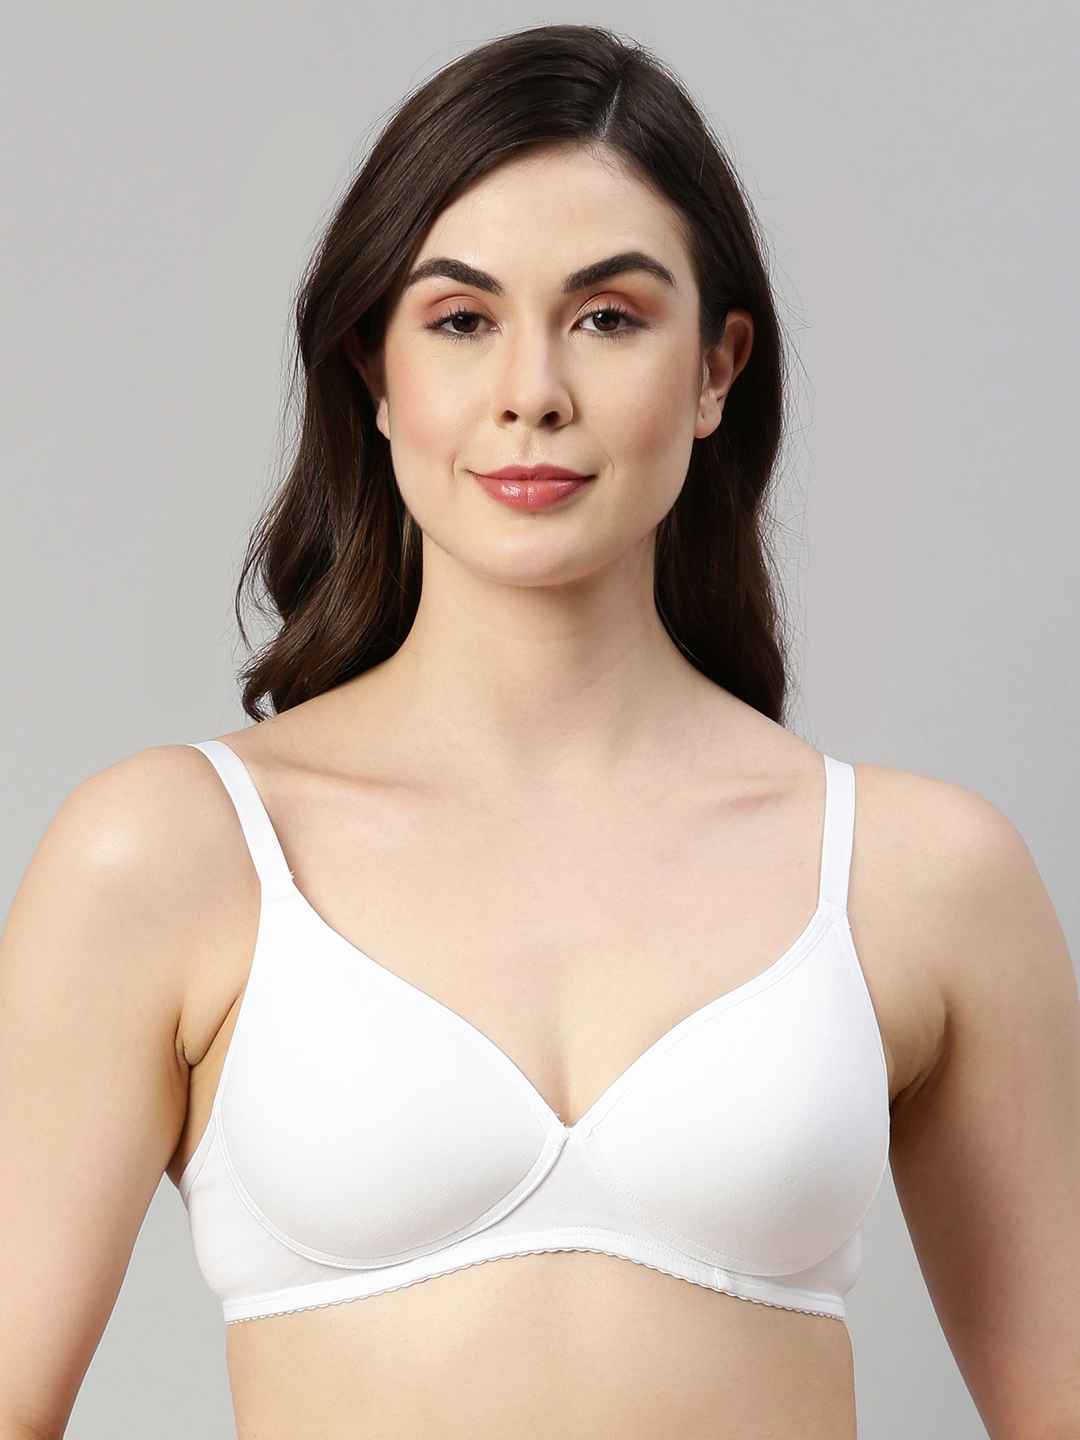 Enamor A039 T SHIRT COTTON BRA PADDED WIREFREE WHITE in Kottayam - Dealers,  Manufacturers & Suppliers - Justdial